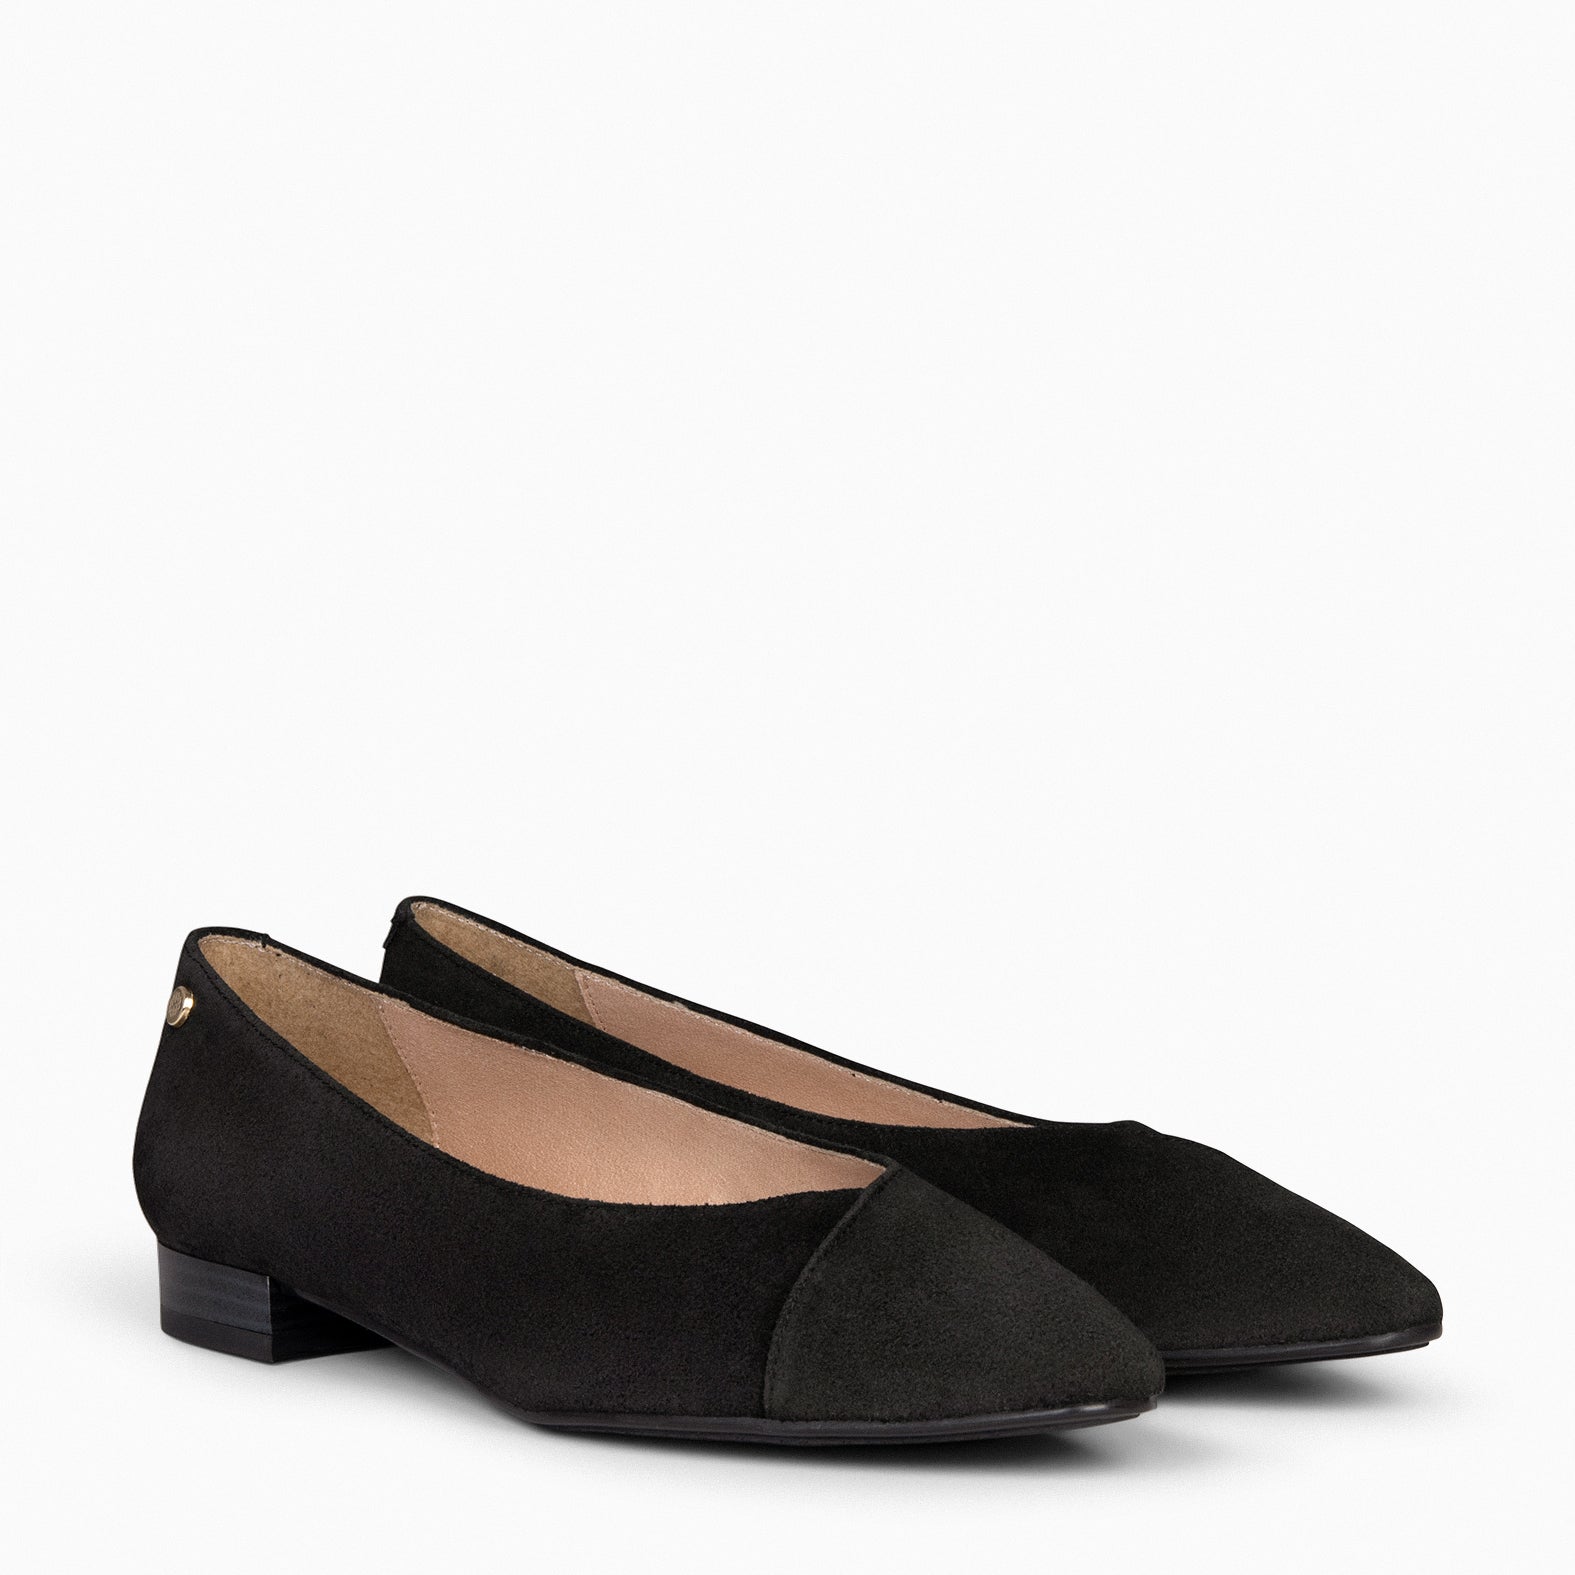 MARIE – NEGRO pointed flats